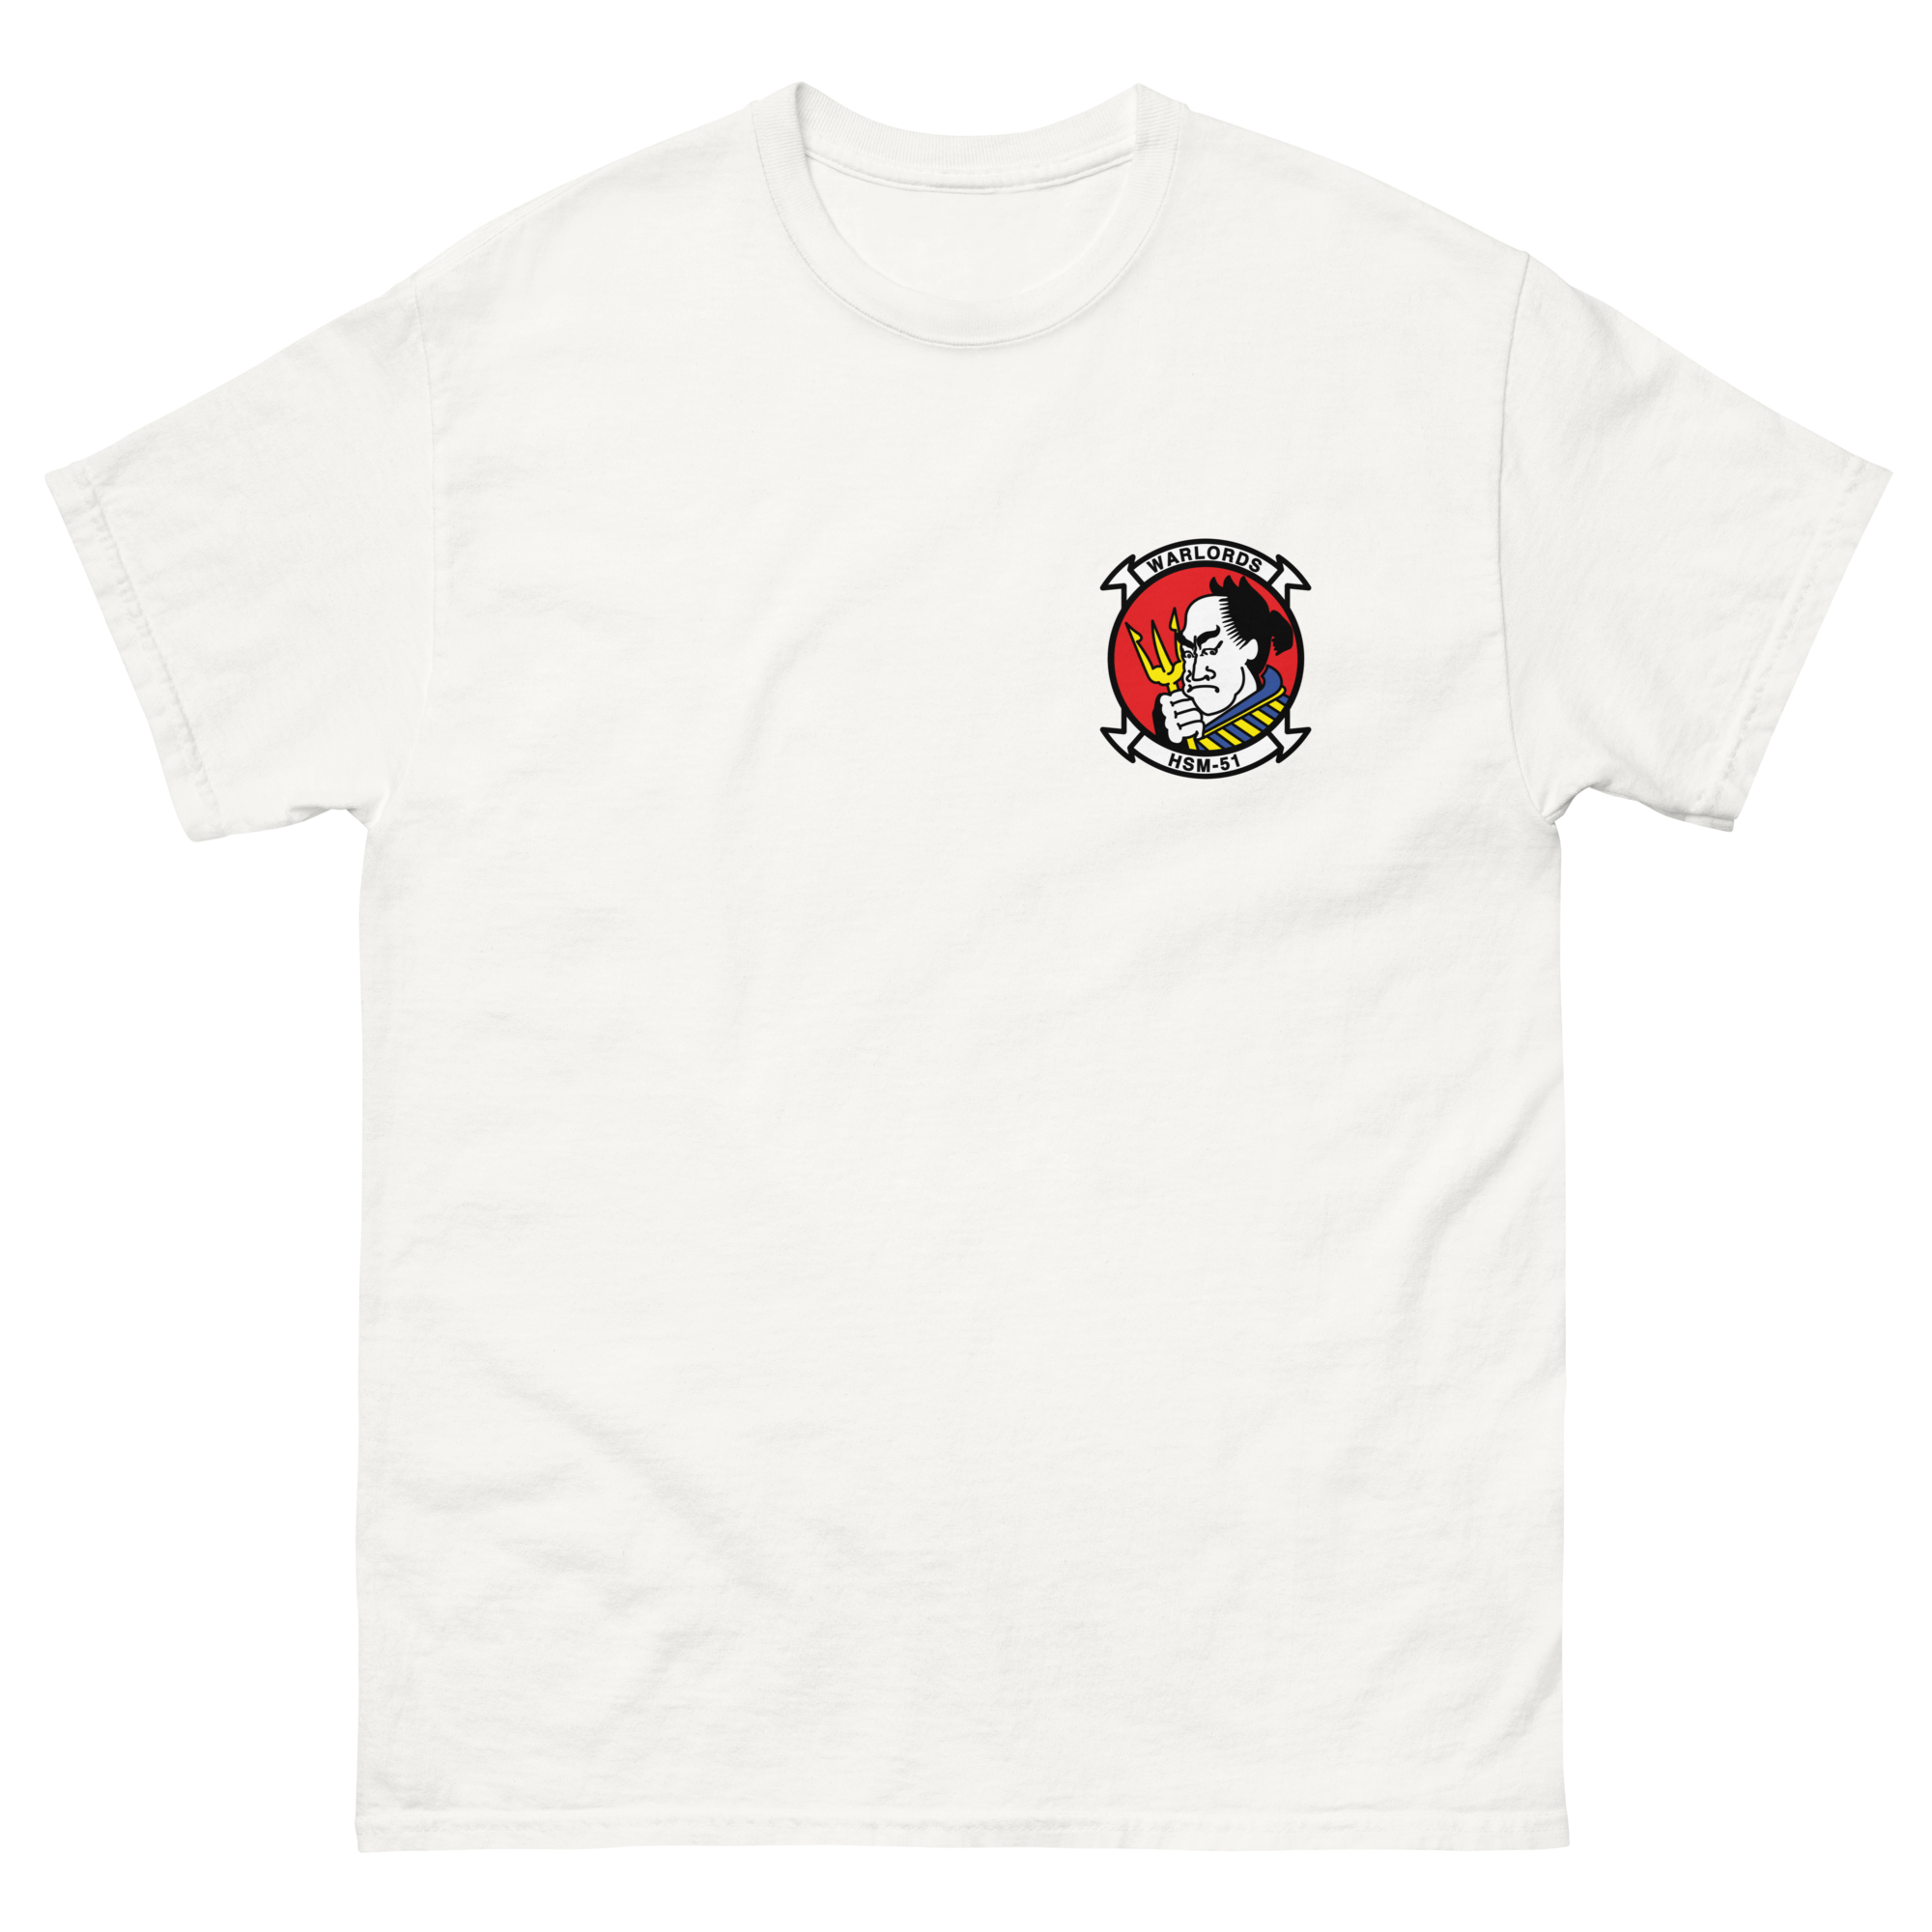 HSM-51 Warlords Squadron Crest T-Shirt